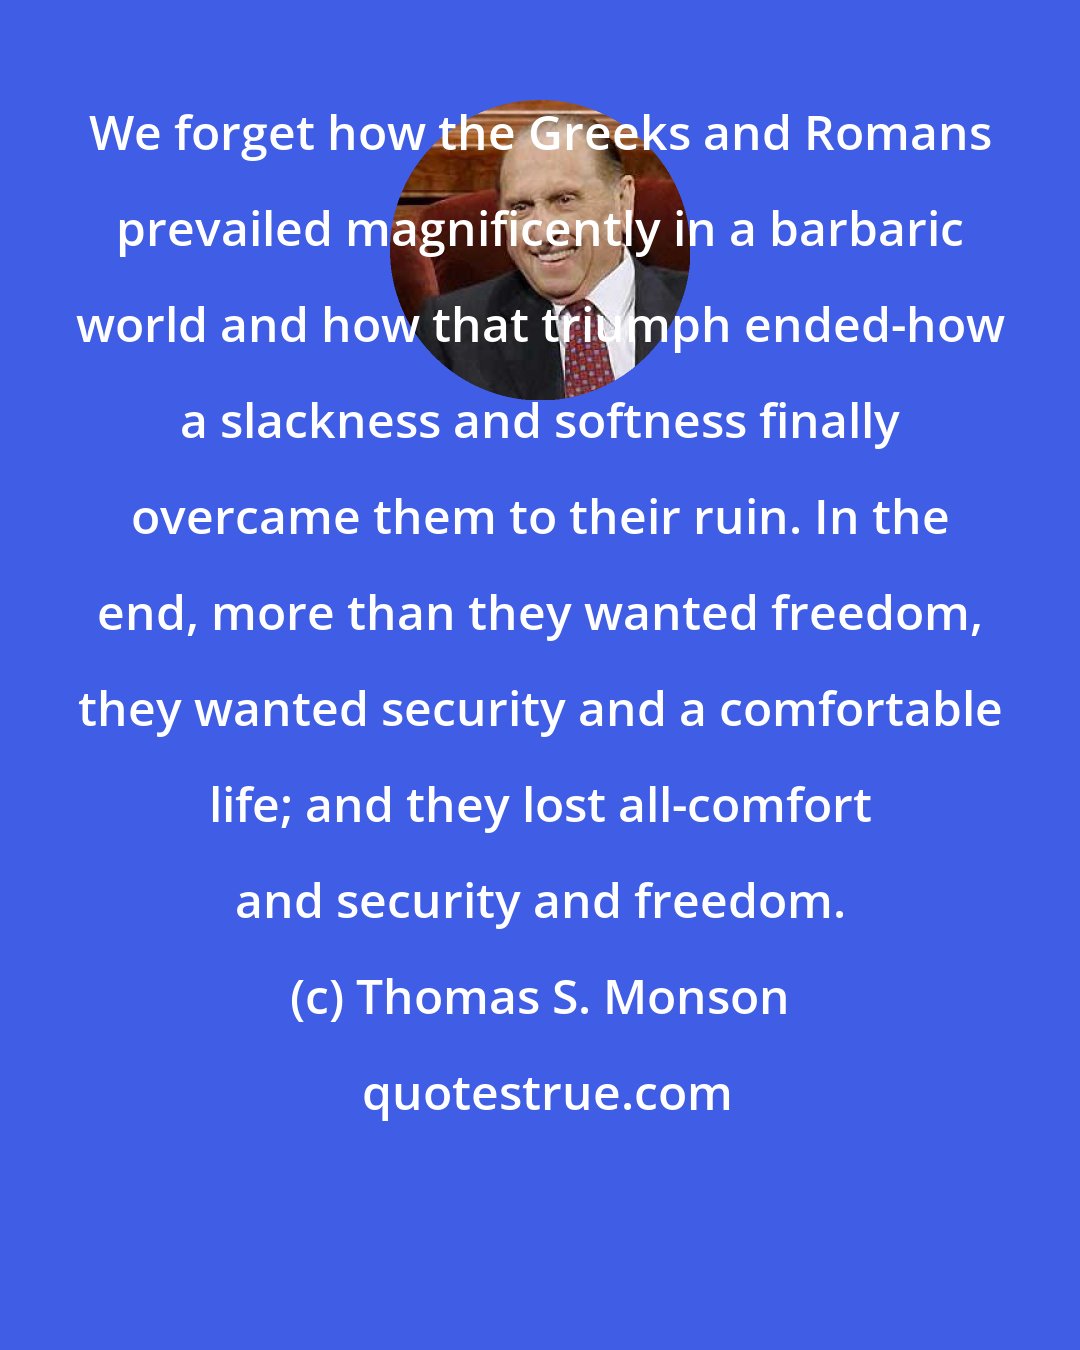 Thomas S. Monson: We forget how the Greeks and Romans prevailed magnificently in a barbaric world and how that triumph ended-how a slackness and softness finally overcame them to their ruin. In the end, more than they wanted freedom, they wanted security and a comfortable life; and they lost all-comfort and security and freedom.